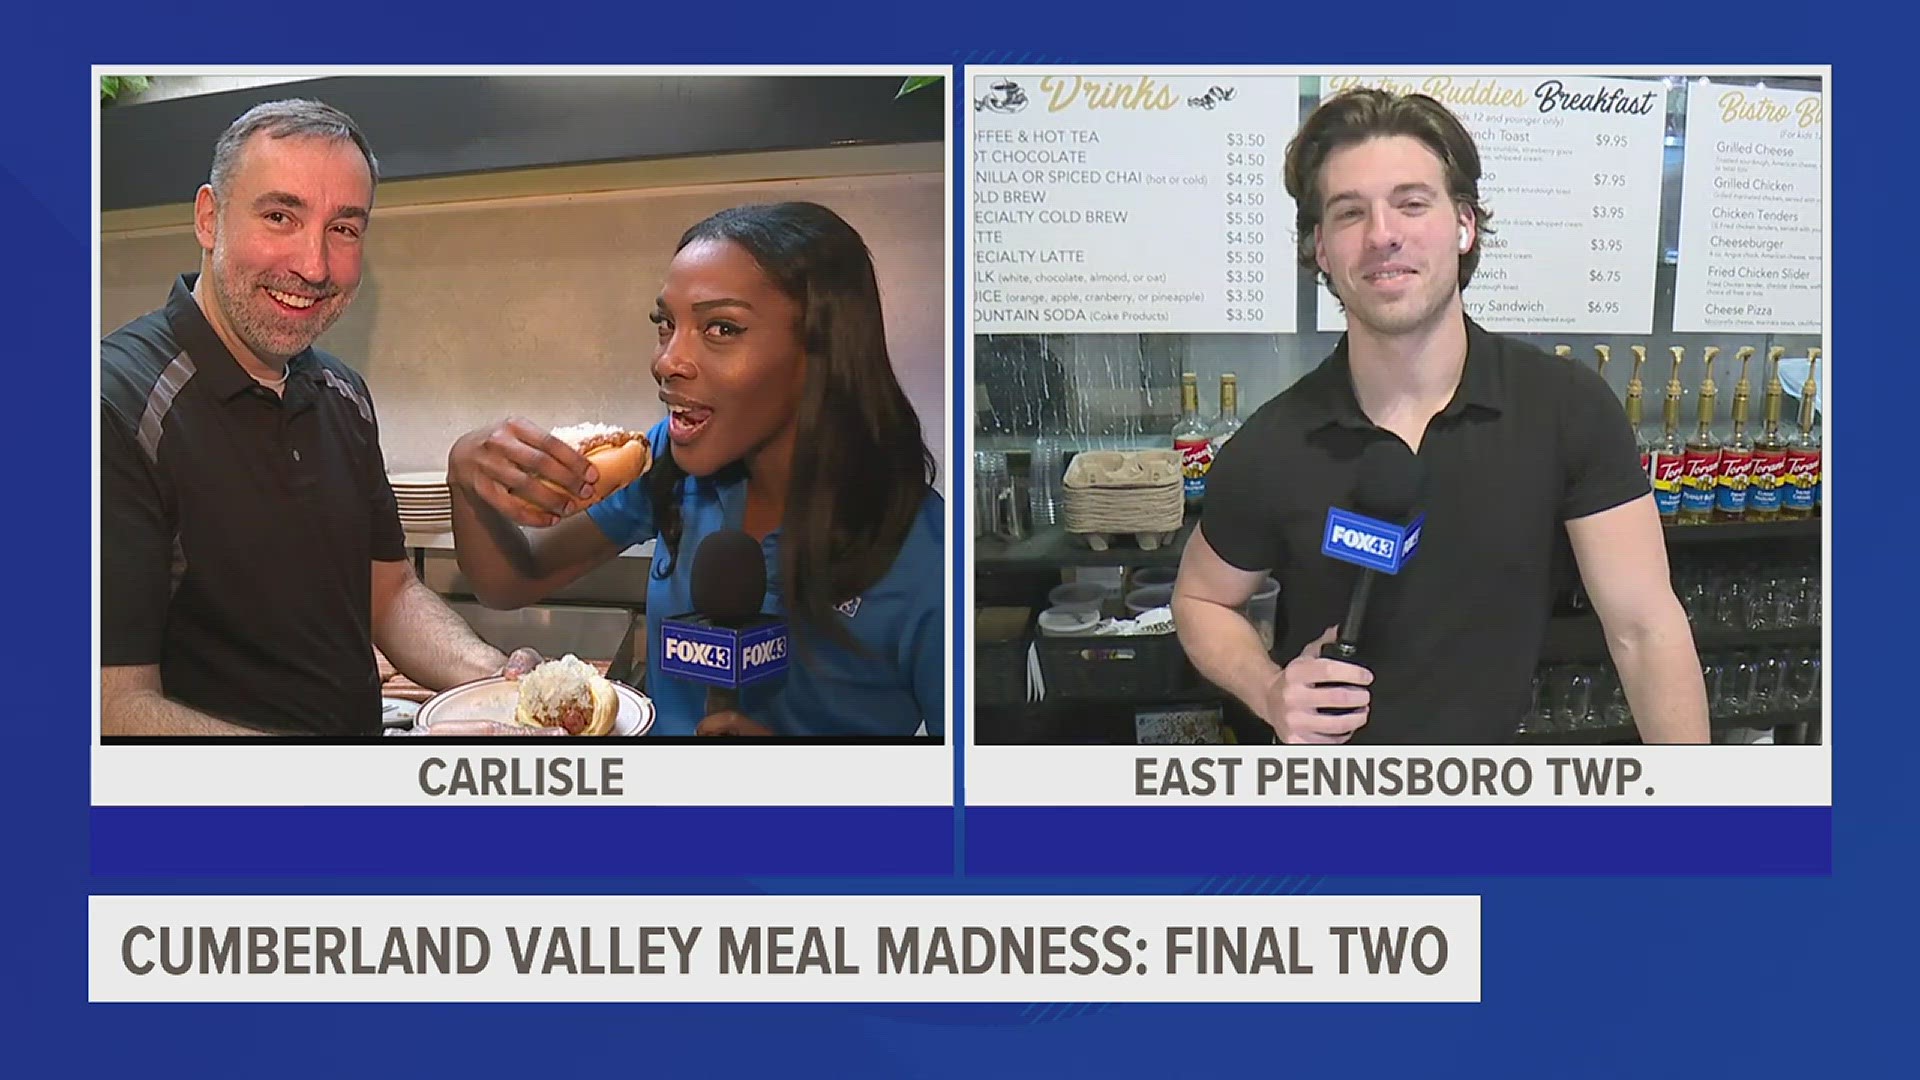 Cumberland Valley Meal Madness comes to a close with two finalists going head to head for the title of “Best Restaurant in Cumberland County."